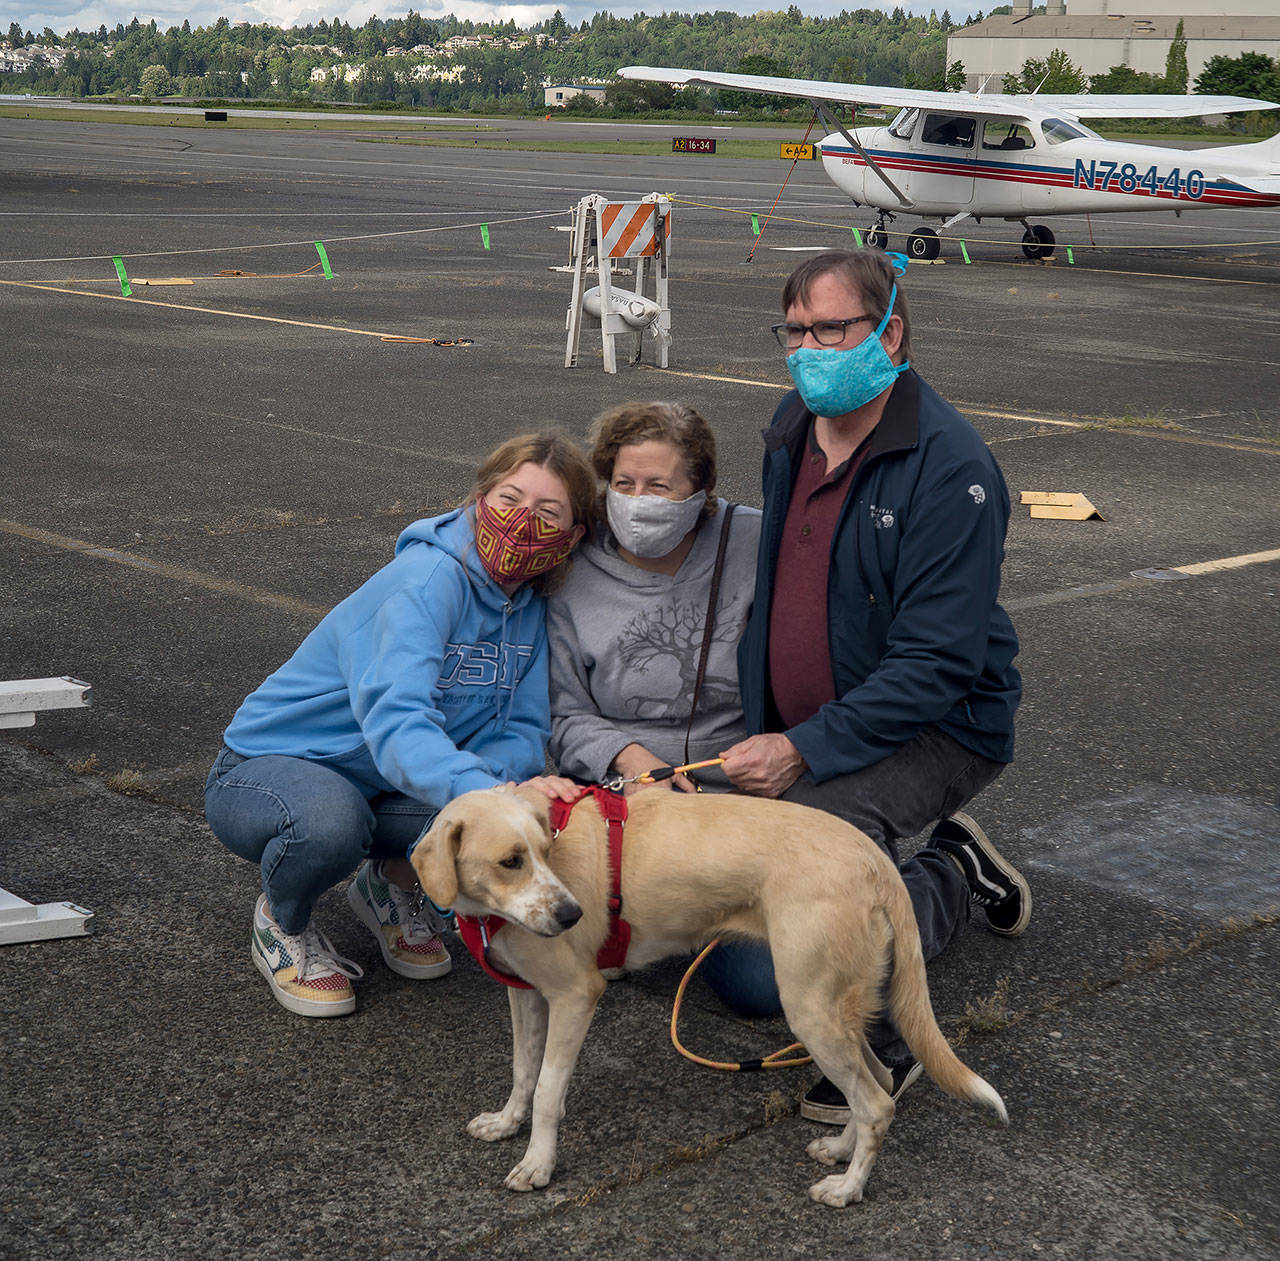 Niaya and her new family meet for the first time at Renton Municipal Airport. The labrador-beagle mix travelled thousands of miles to meet her new family in the midst of the coronavirus pandemic. (Andre Osorio / Renton Reporter)